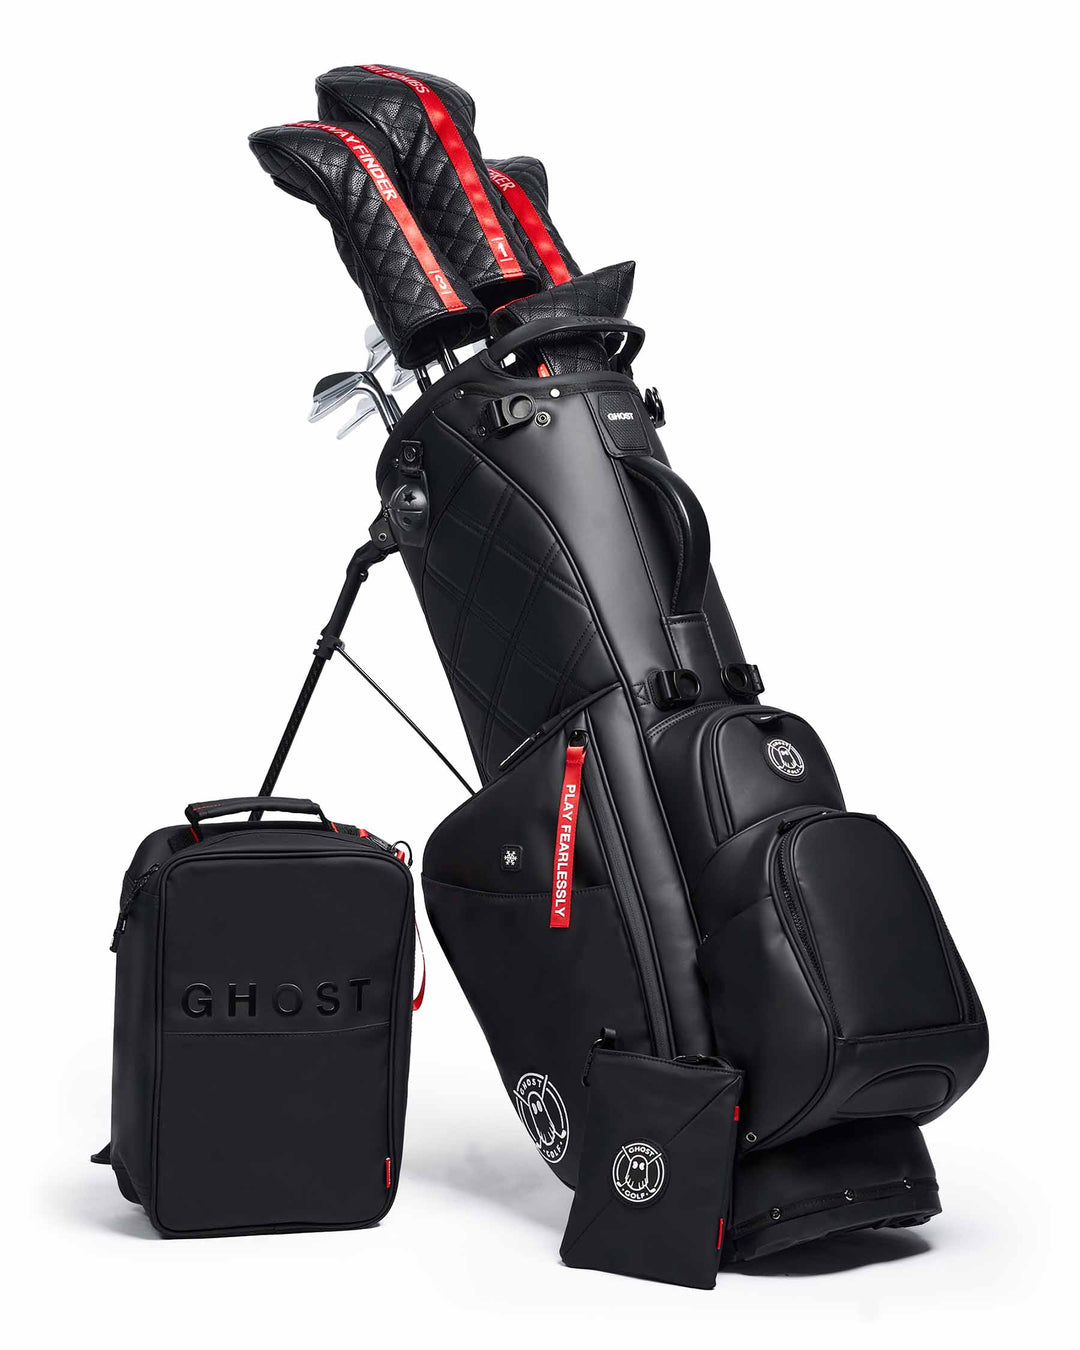 Ghost Golf Katana Black Leather Golf Bag with Red Tags. With Golf Clubs and Head Covers and Black Shoe Bag and Pouch